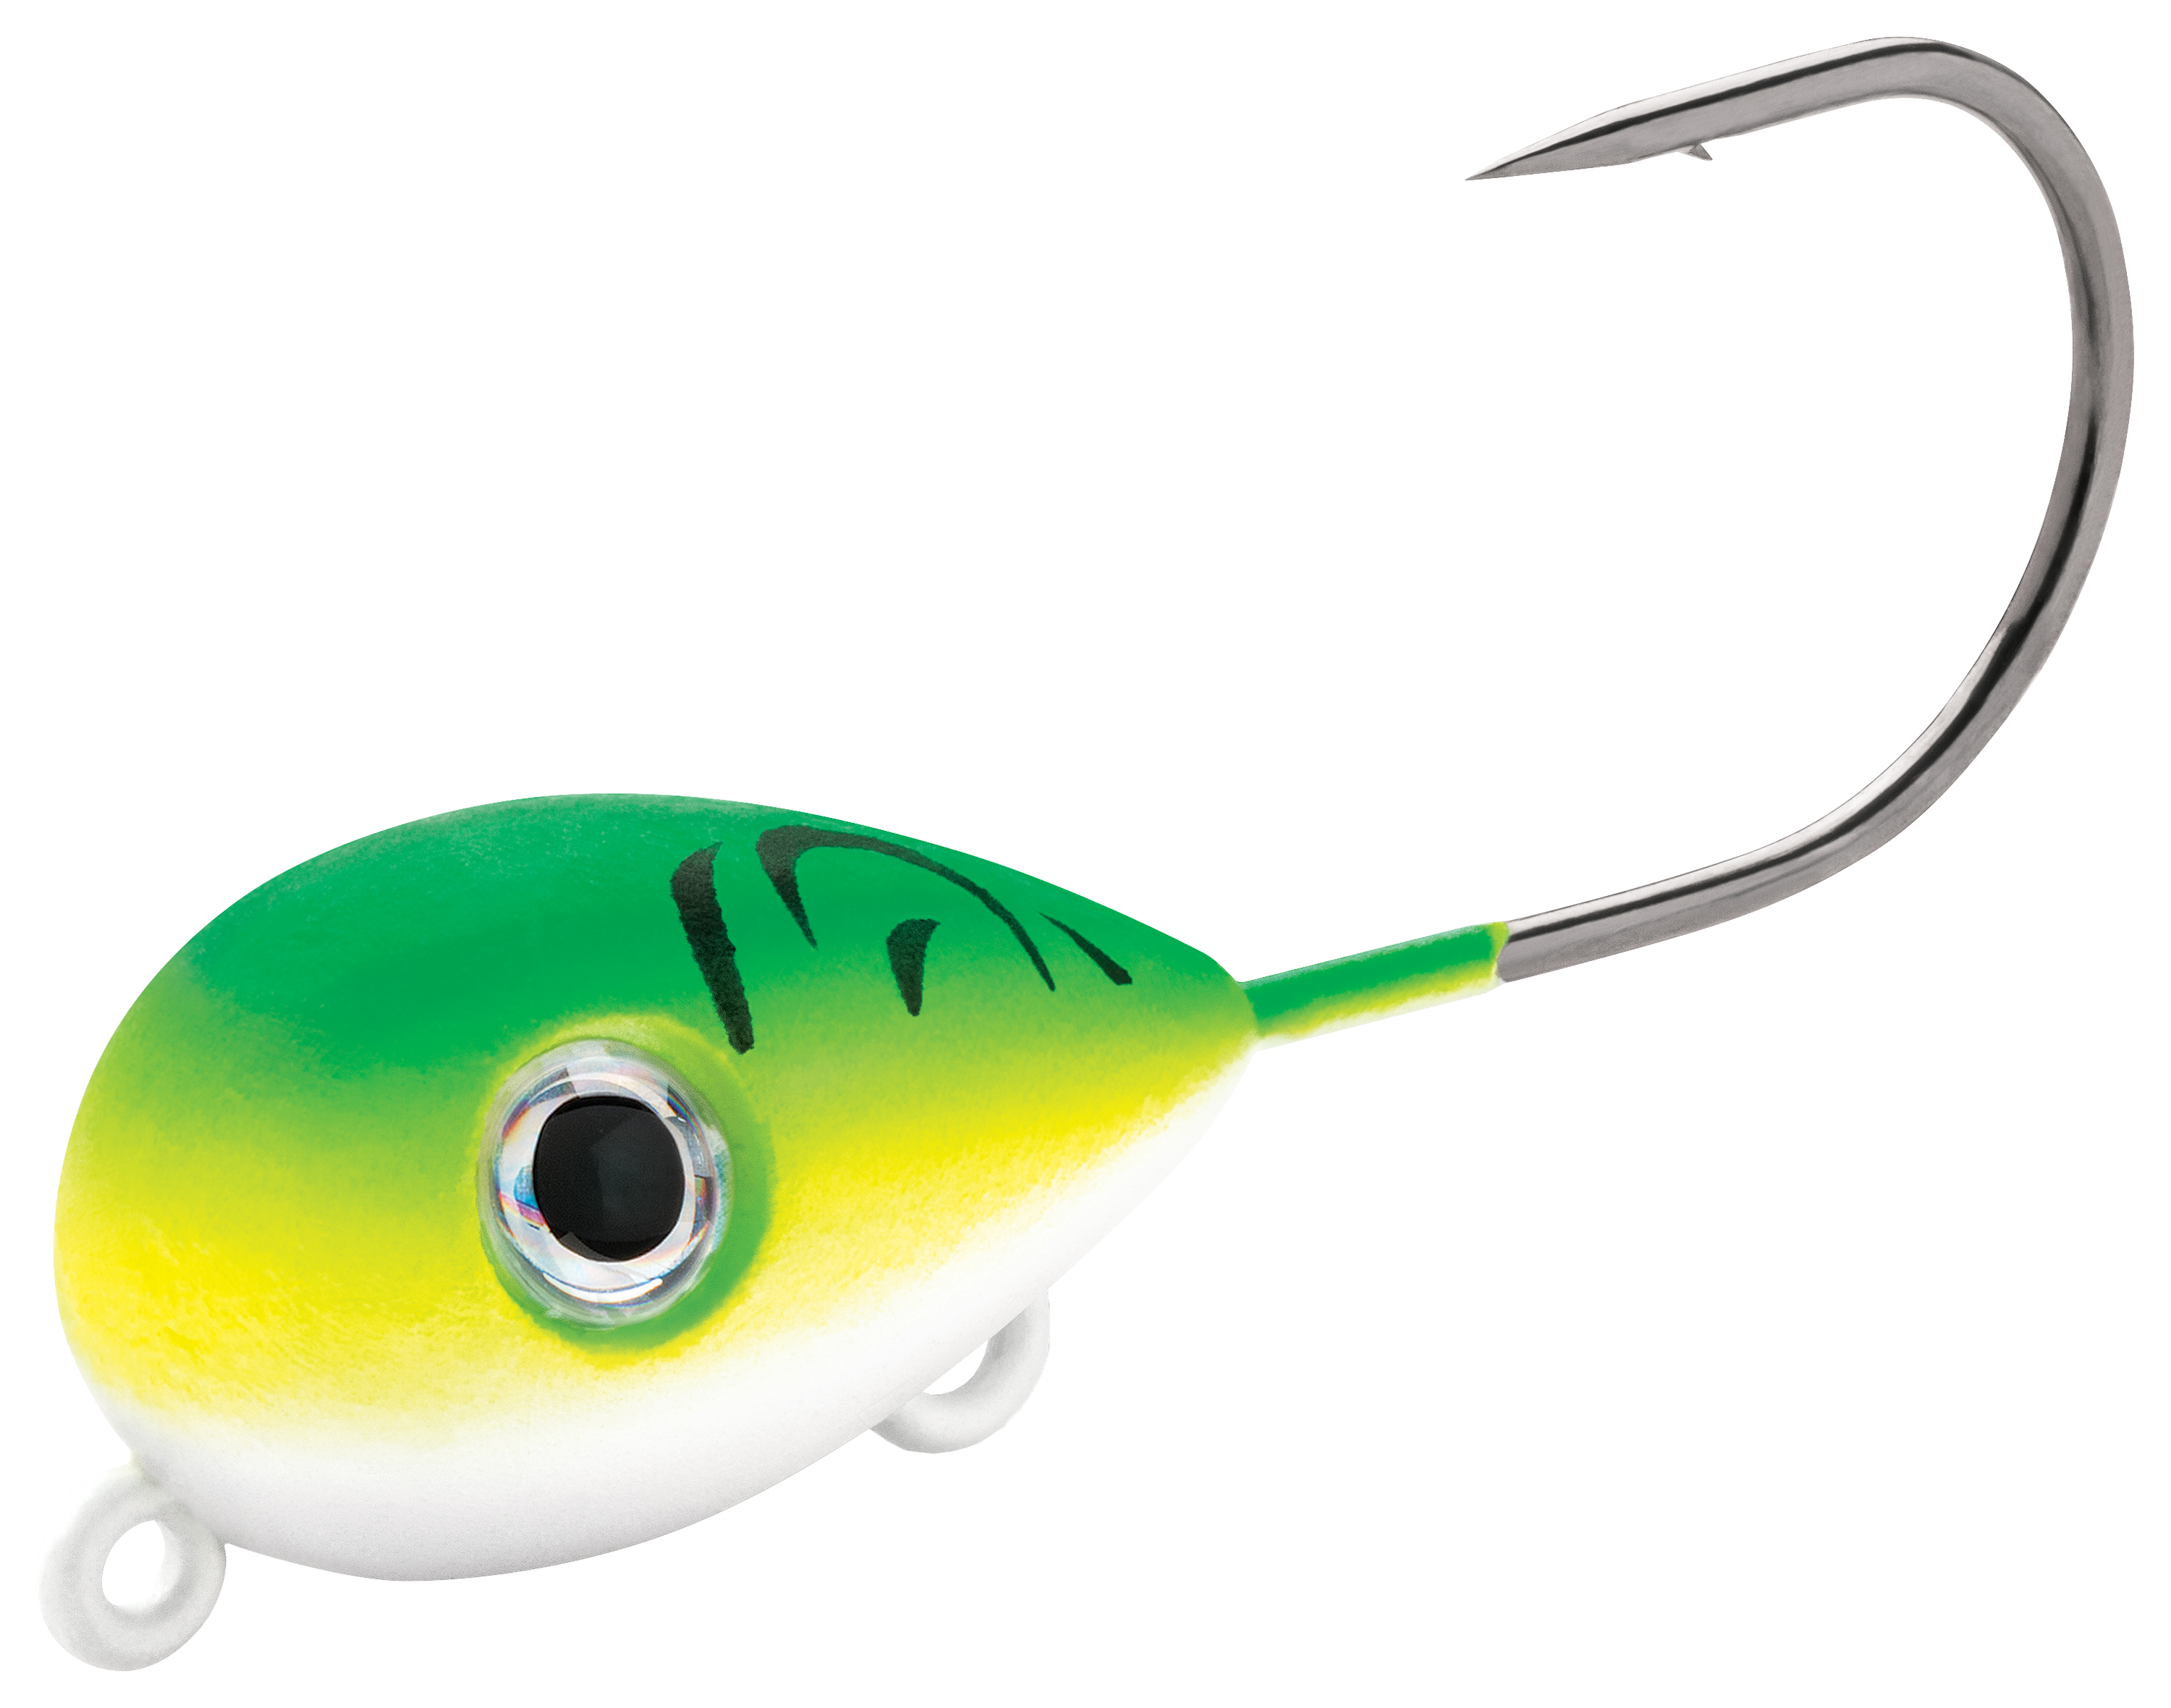 VMC Chartreuse Hover Jig